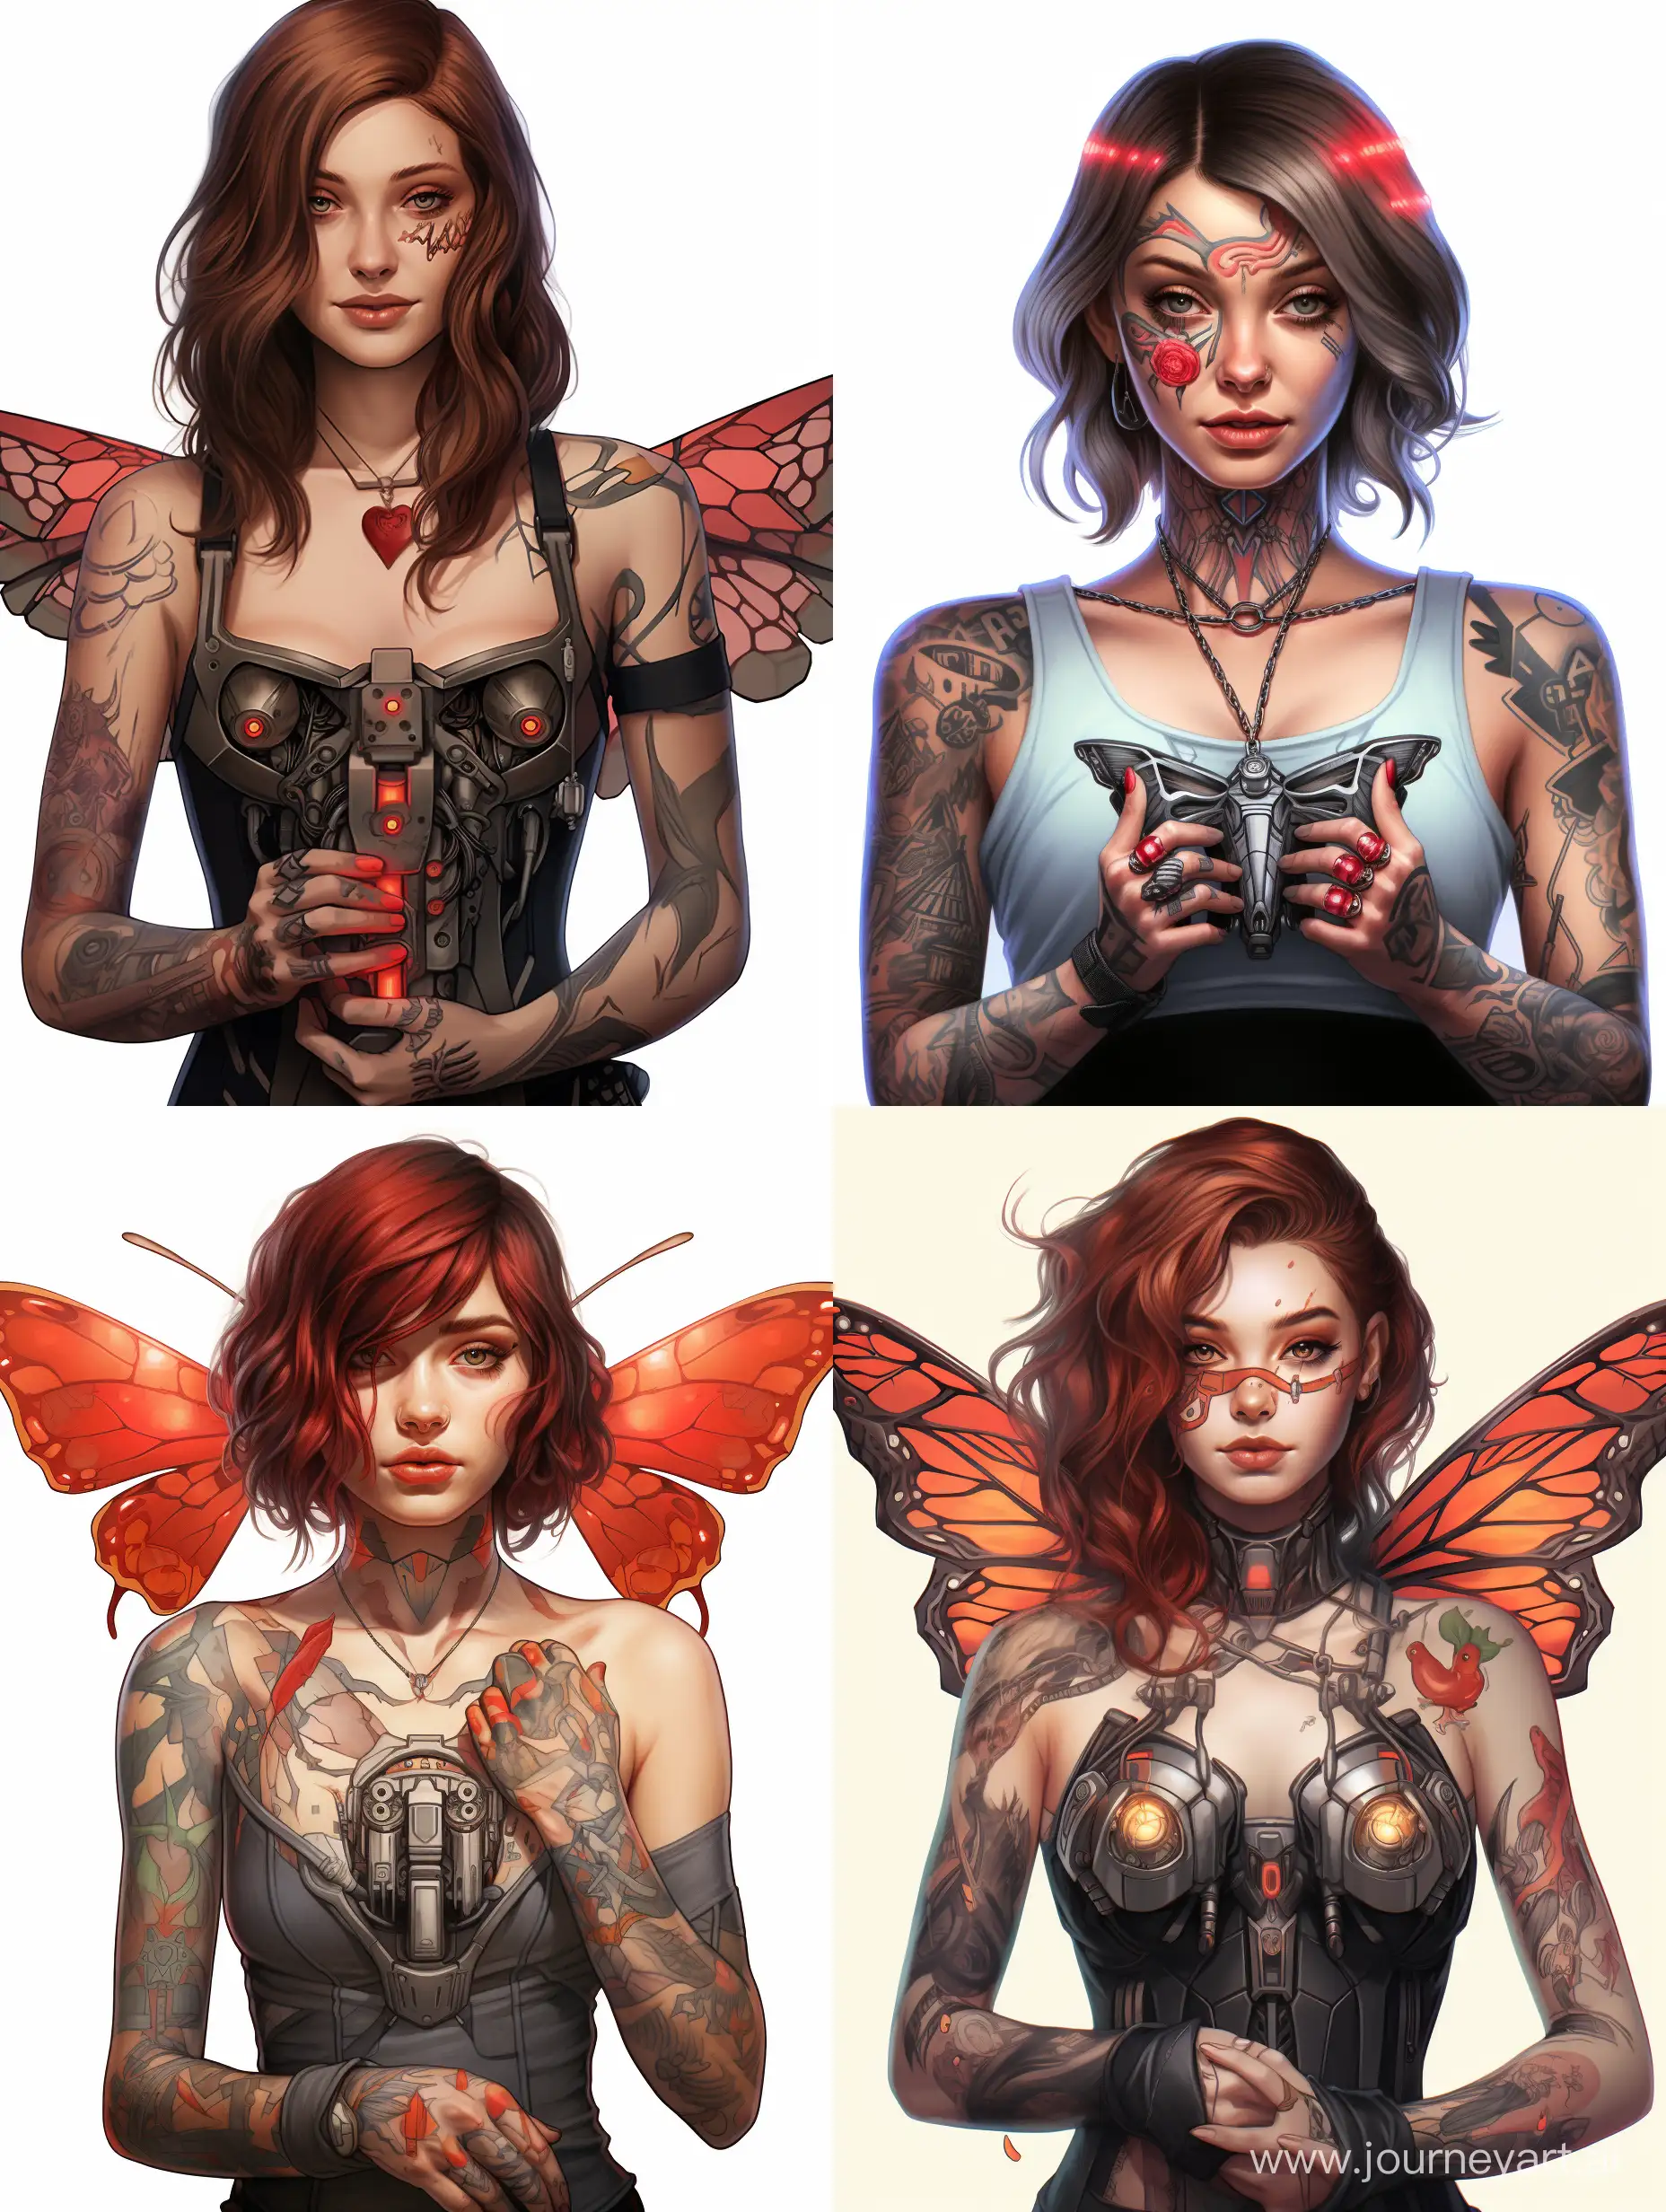 Charming-Cyberpunk-Robot-Girl-with-Red-Moth-Tattoo-and-Tattoo-Machine